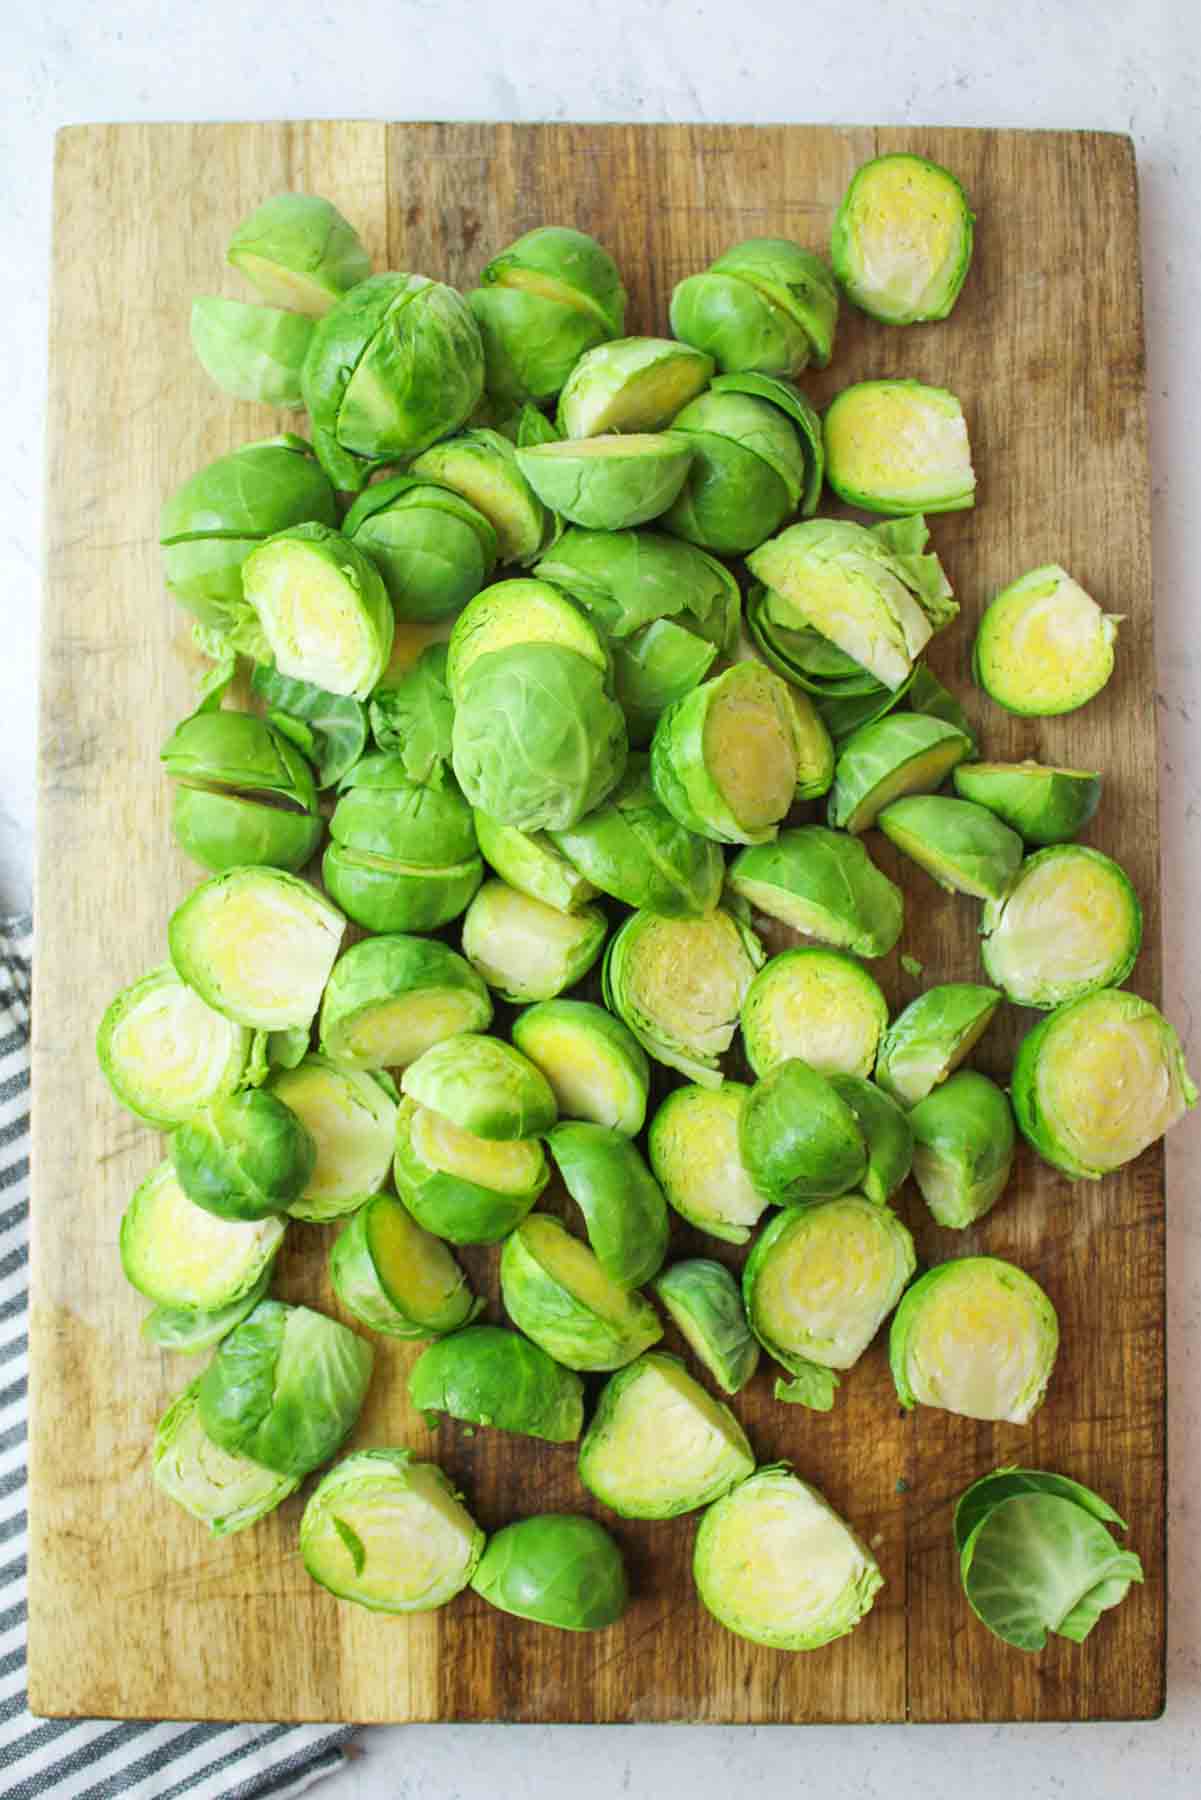 halved brussel sprouts on a wooden cutting board.